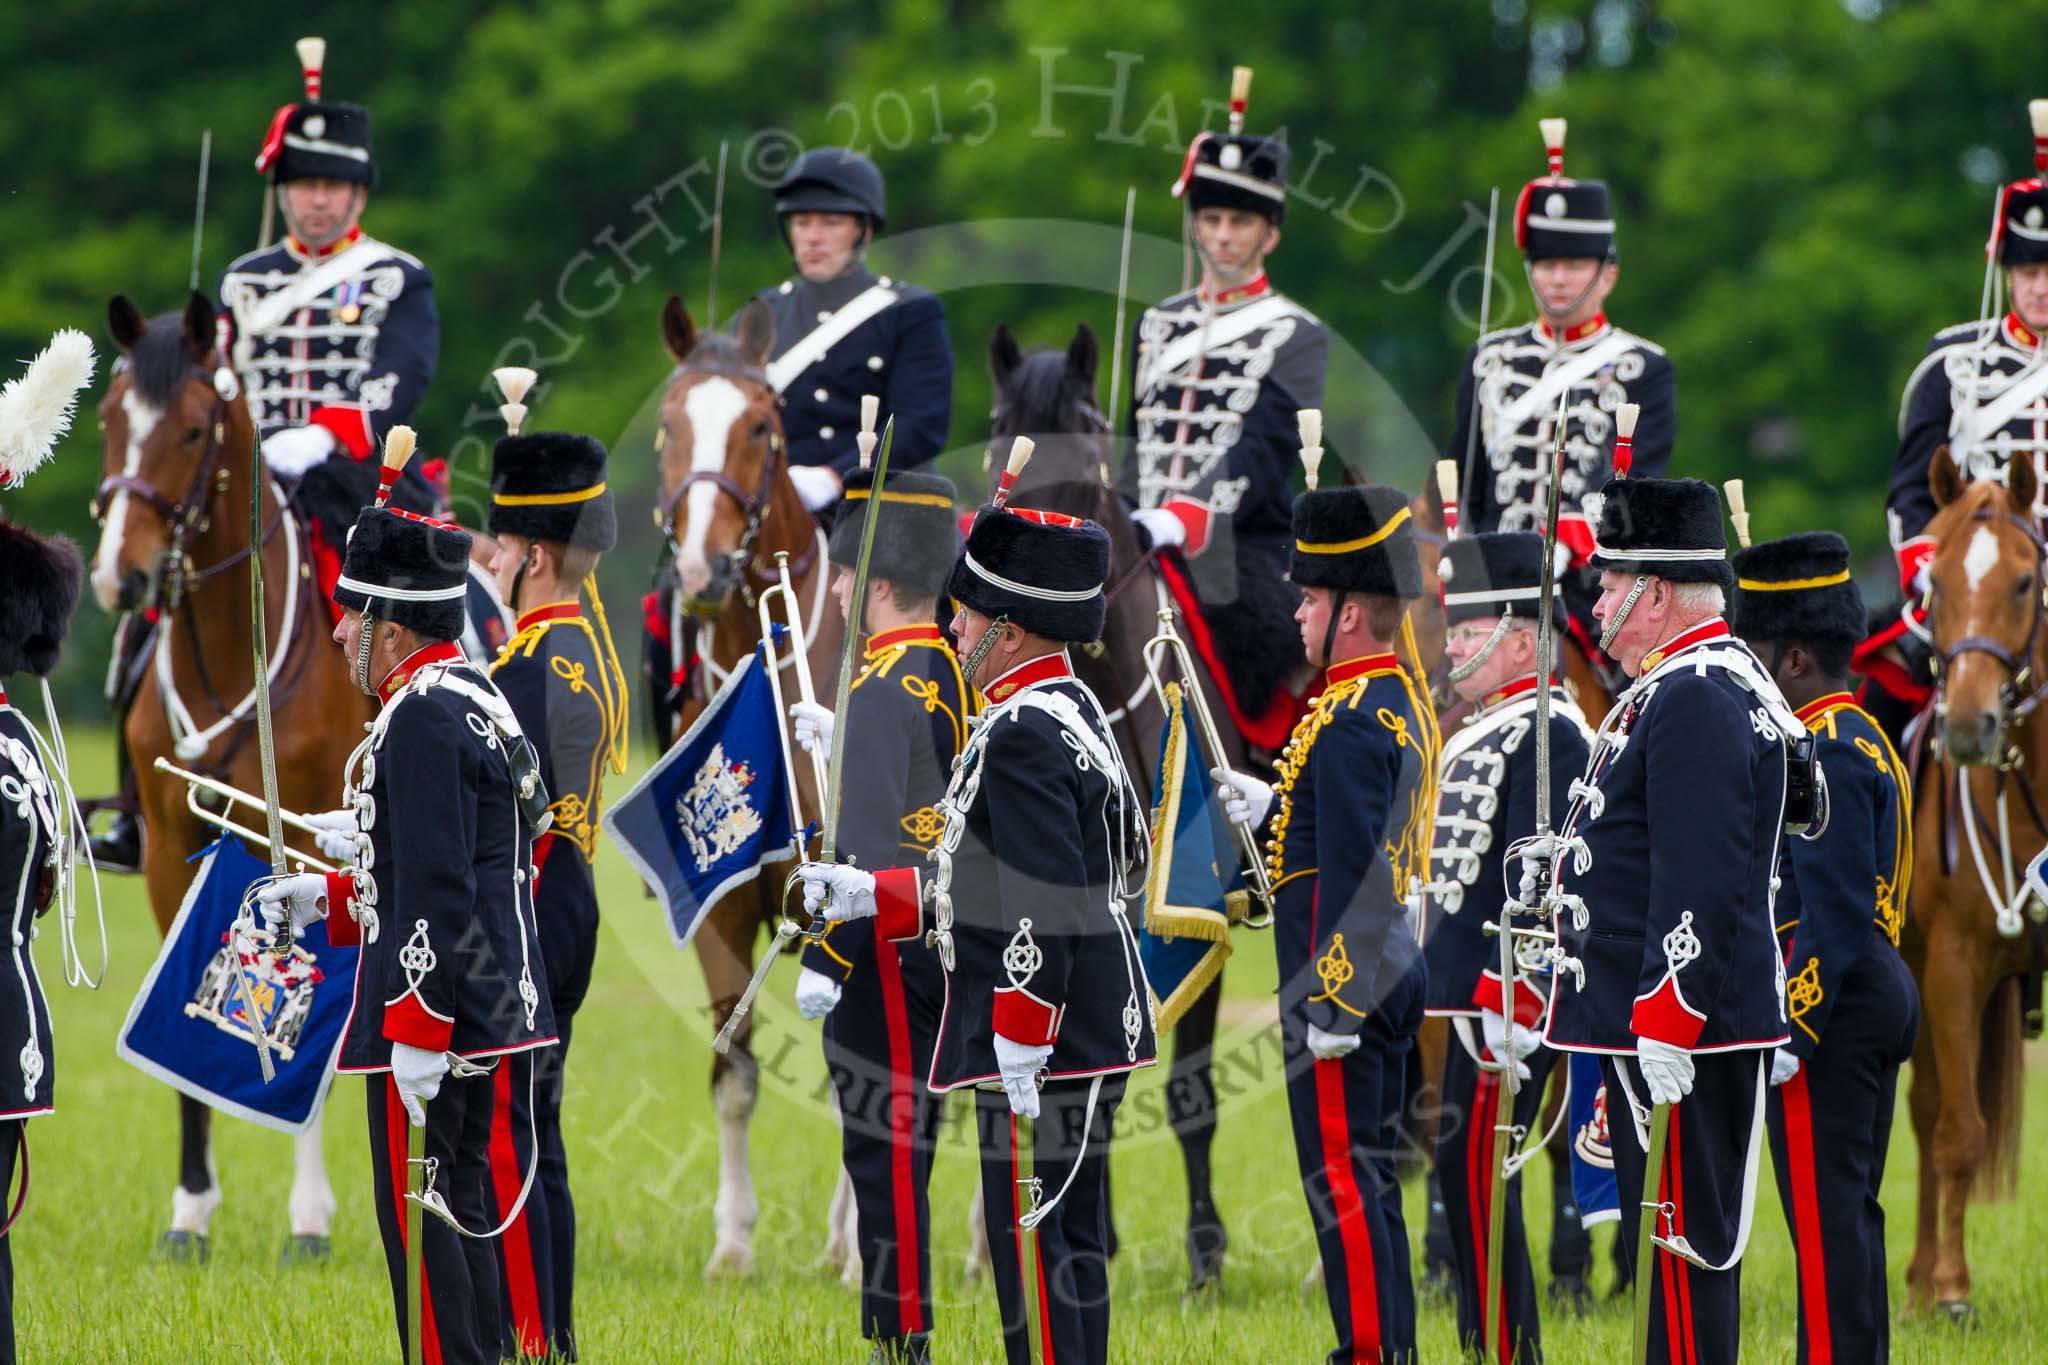 The Light Cavalry HAC Annual Review and Inspection 2013.
Windsor Great Park Review Ground,
Windsor,
Berkshire,
United Kingdom,
on 09 June 2013 at 13:29, image #382